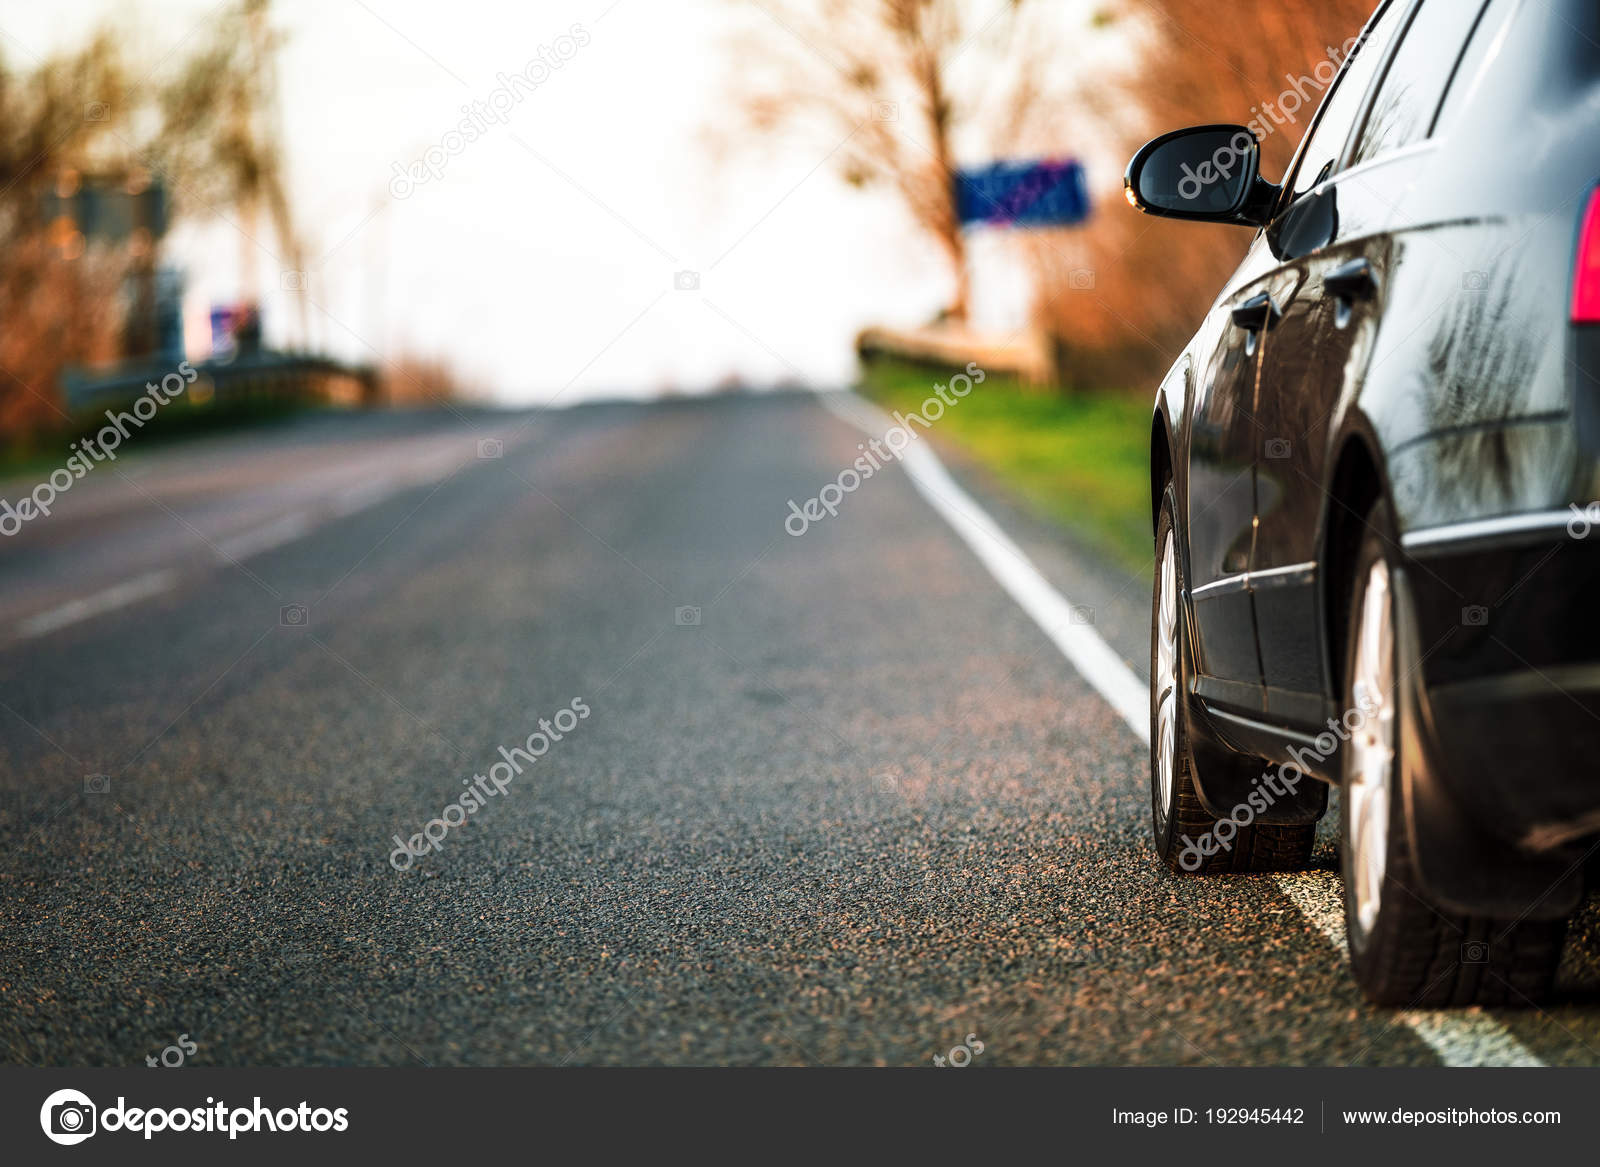 Blurred Road Car Speed Motion Background Stock Photo by ©Ivantsov 192945442